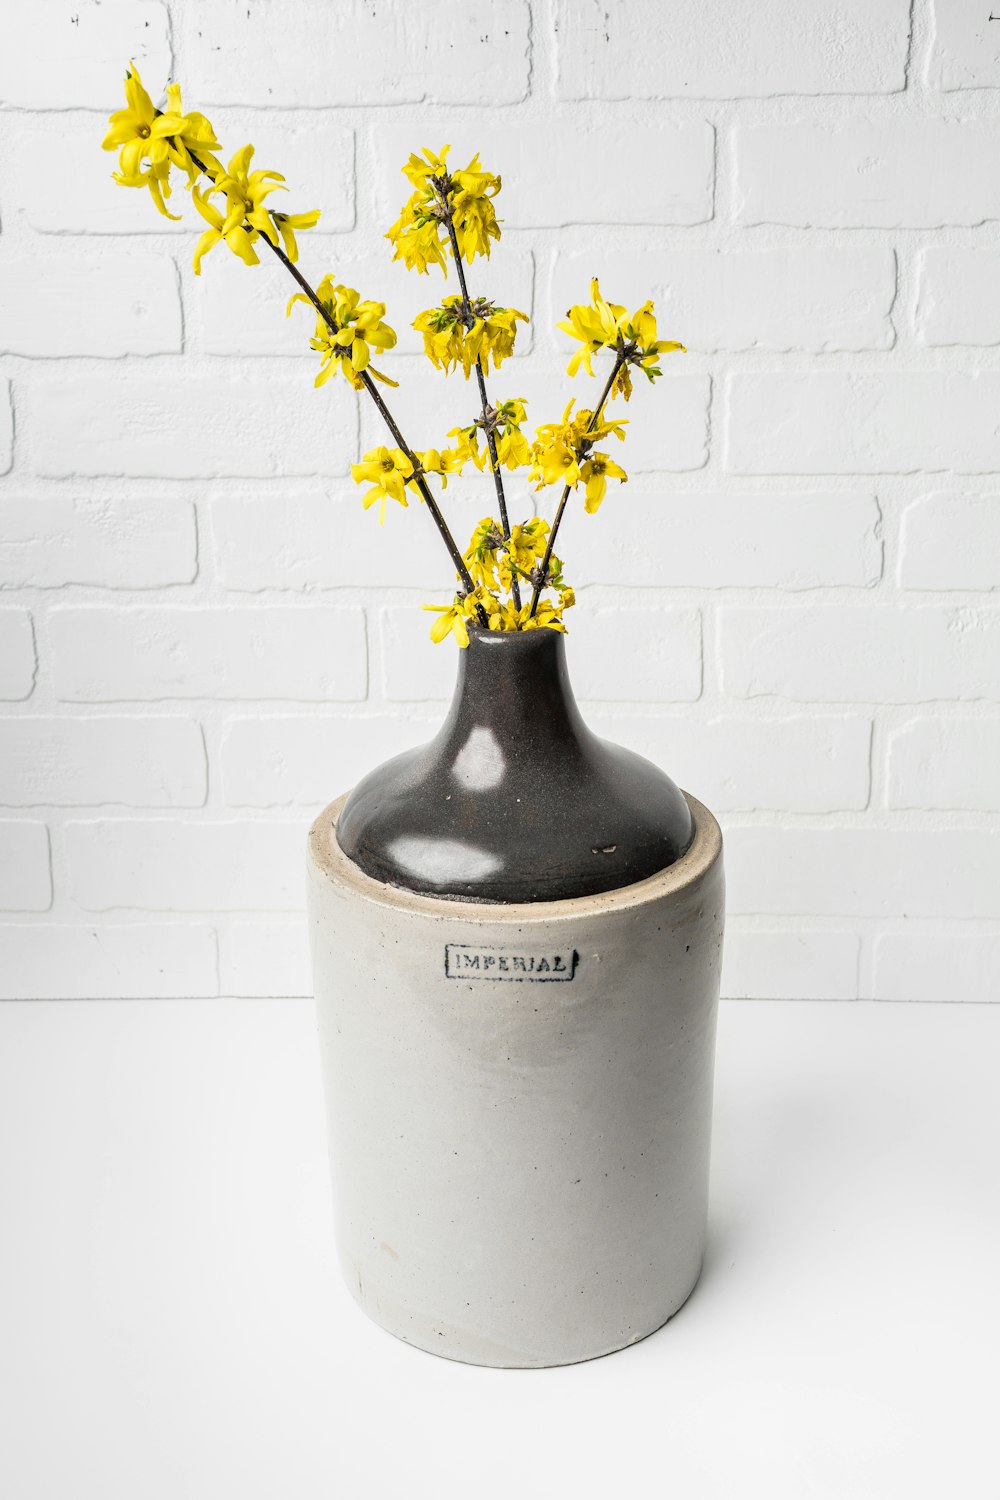 a gray vase with yellow flowers in it